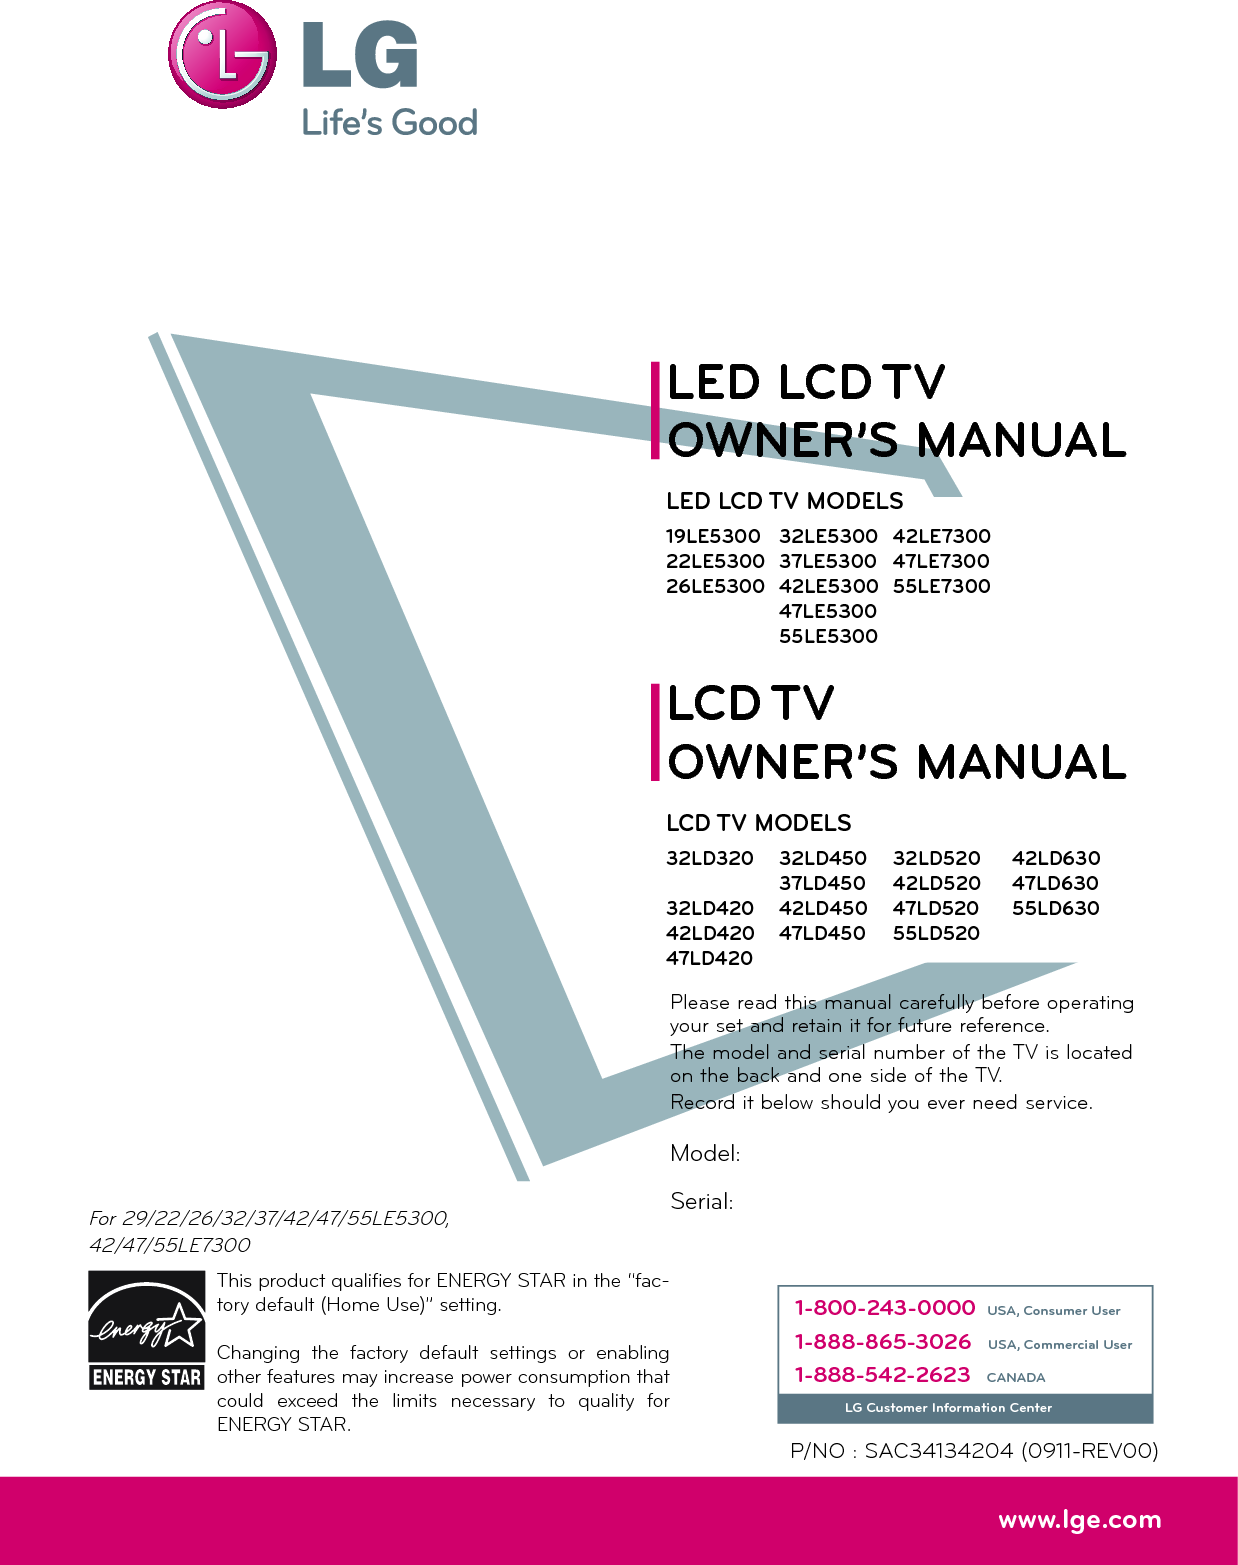 Please read this manual carefully before operating your set and retain it for future reference.The model and serial number of the TV is located on the back and one side of the TV. Record it below should you ever need service.P/NO : SAC34134204 (0911-REV00)www.lge.comThis product qualifies for ENERGY STAR in the “fac-tory default (Home Use)” setting.Changing the factory default settings or enabling other features may increase power consumption that could exceed the limits necessary to quality for ENERGY STAR.Model:Serial:For 29/22/26/32/37/42/47/55LE5300,42/47/55LE73001-800-243-0000 USA, Consumer User1-888-865-3026 USA, Commercial User1-888-542-2623 CANADALG Customer Information CenterLCD TVLED LCD TVOWNER’S MANUALOWNER’S MANUALLCD TV MODELS32LD32032LD42042LD42047LD42032LD520 42LD52047LD52055LD520LED LCD TV MODELS19LE530022LE530026LE530032LE530037LE530042LE530047LE530055LE530032LD45037LD45042LD45047LD45042LD63047LD63055LD63042LE730047LE730055LE7300